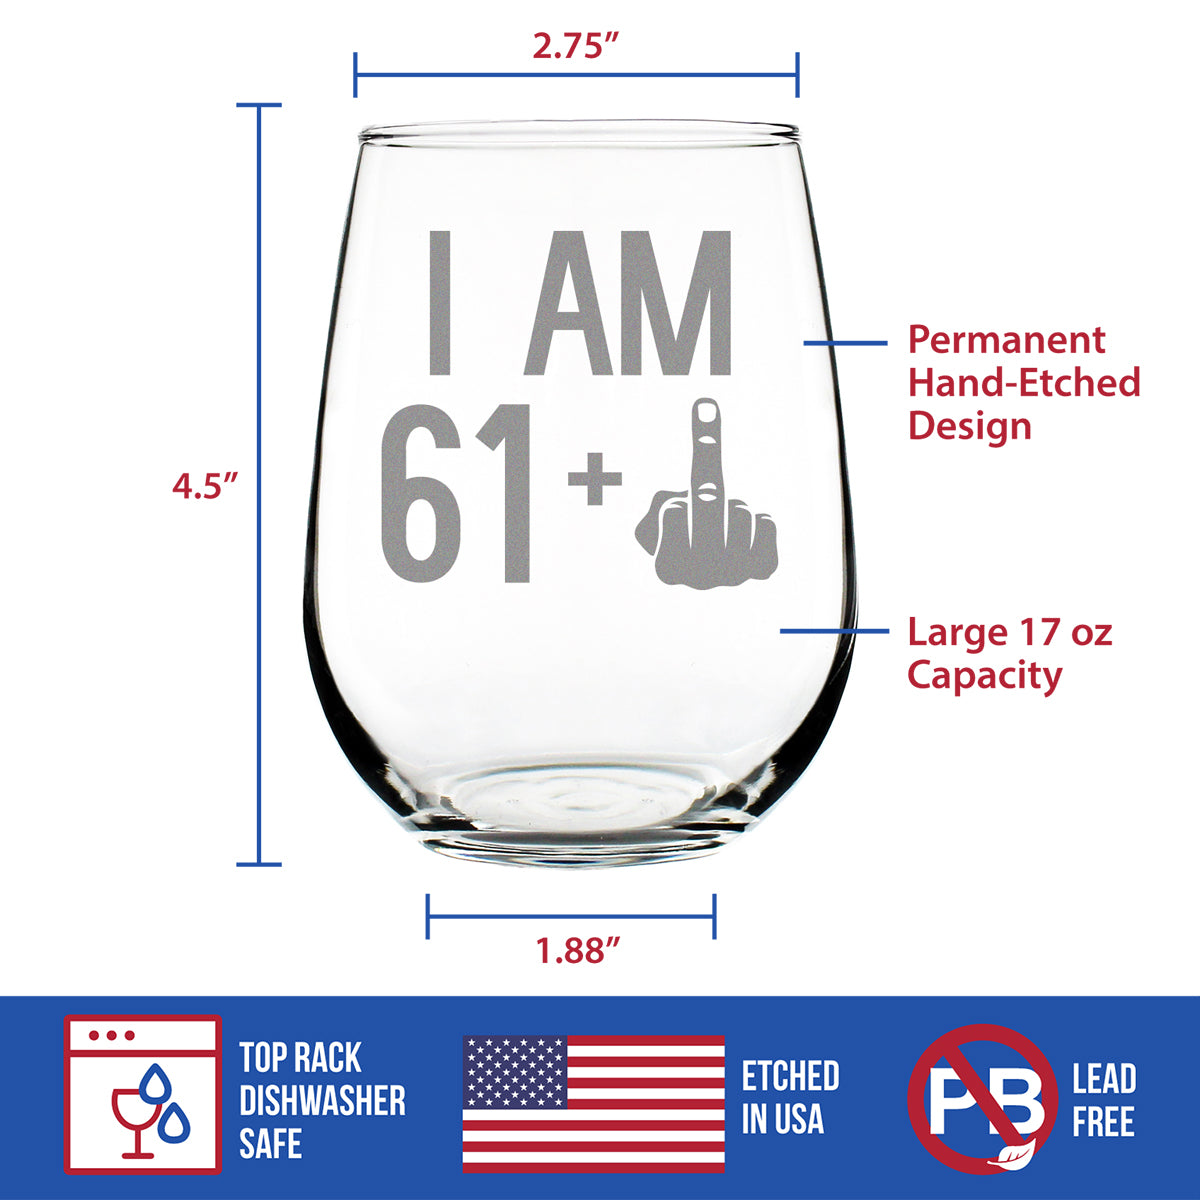 61 + 1 Middle Finger - 62nd Birthday Stemless Wine Glass for Women &amp; Men - Cute Funny Wine Gift Idea - Unique Personalized Bday Glasses for Best Friend Turning 62 - Drinking Party Decoration